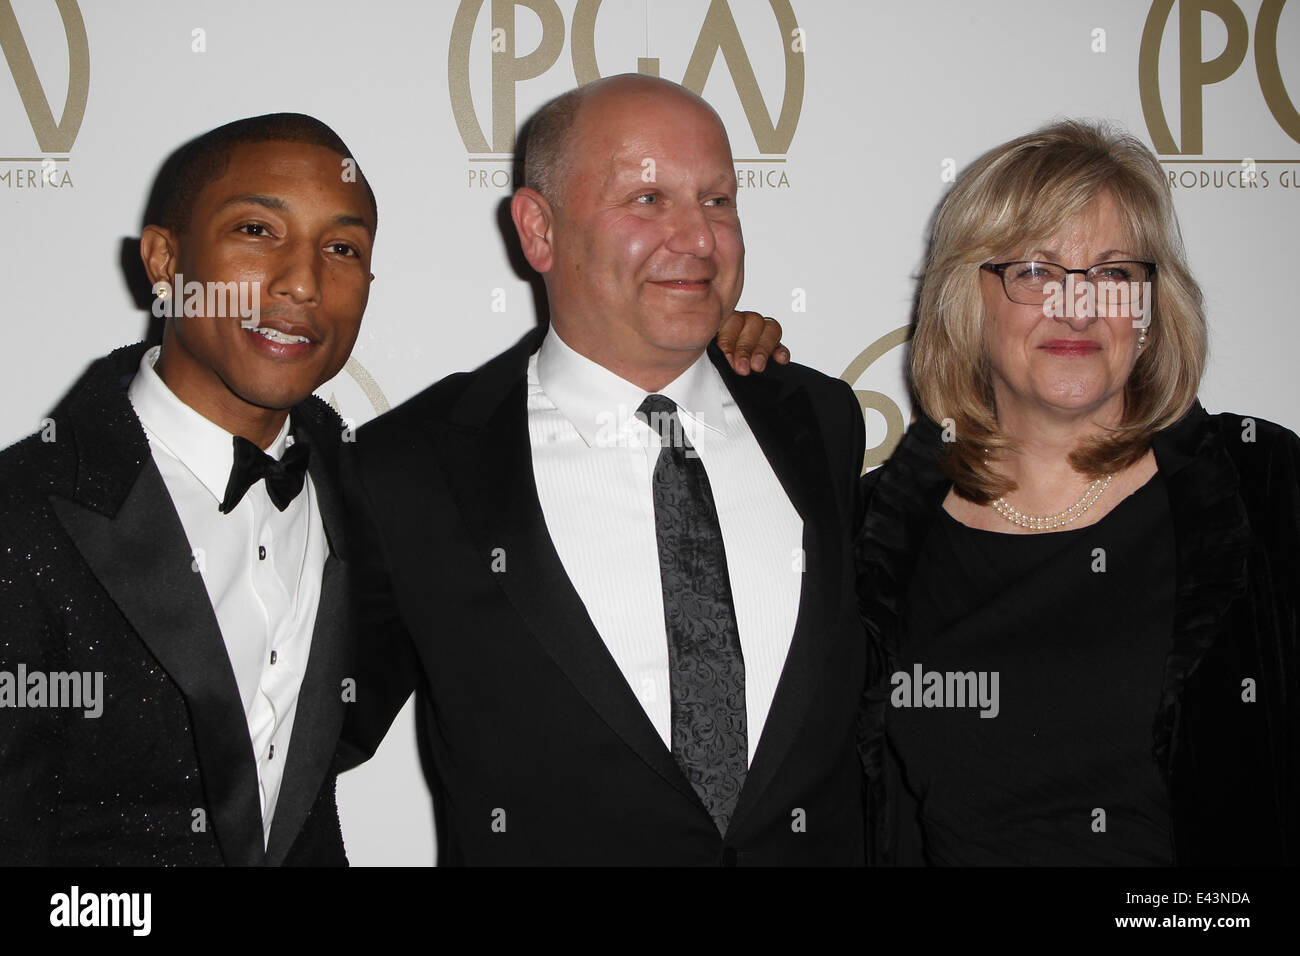 The 25th Annual Producer Guild of America Awards at The Beverly Hilton Hotel  Featuring: Pharrell Williams,Christopher Meledandri,Janet Healy Where: Beverly Hills, California, United States When: 19 Jan 2014 Stock Photo